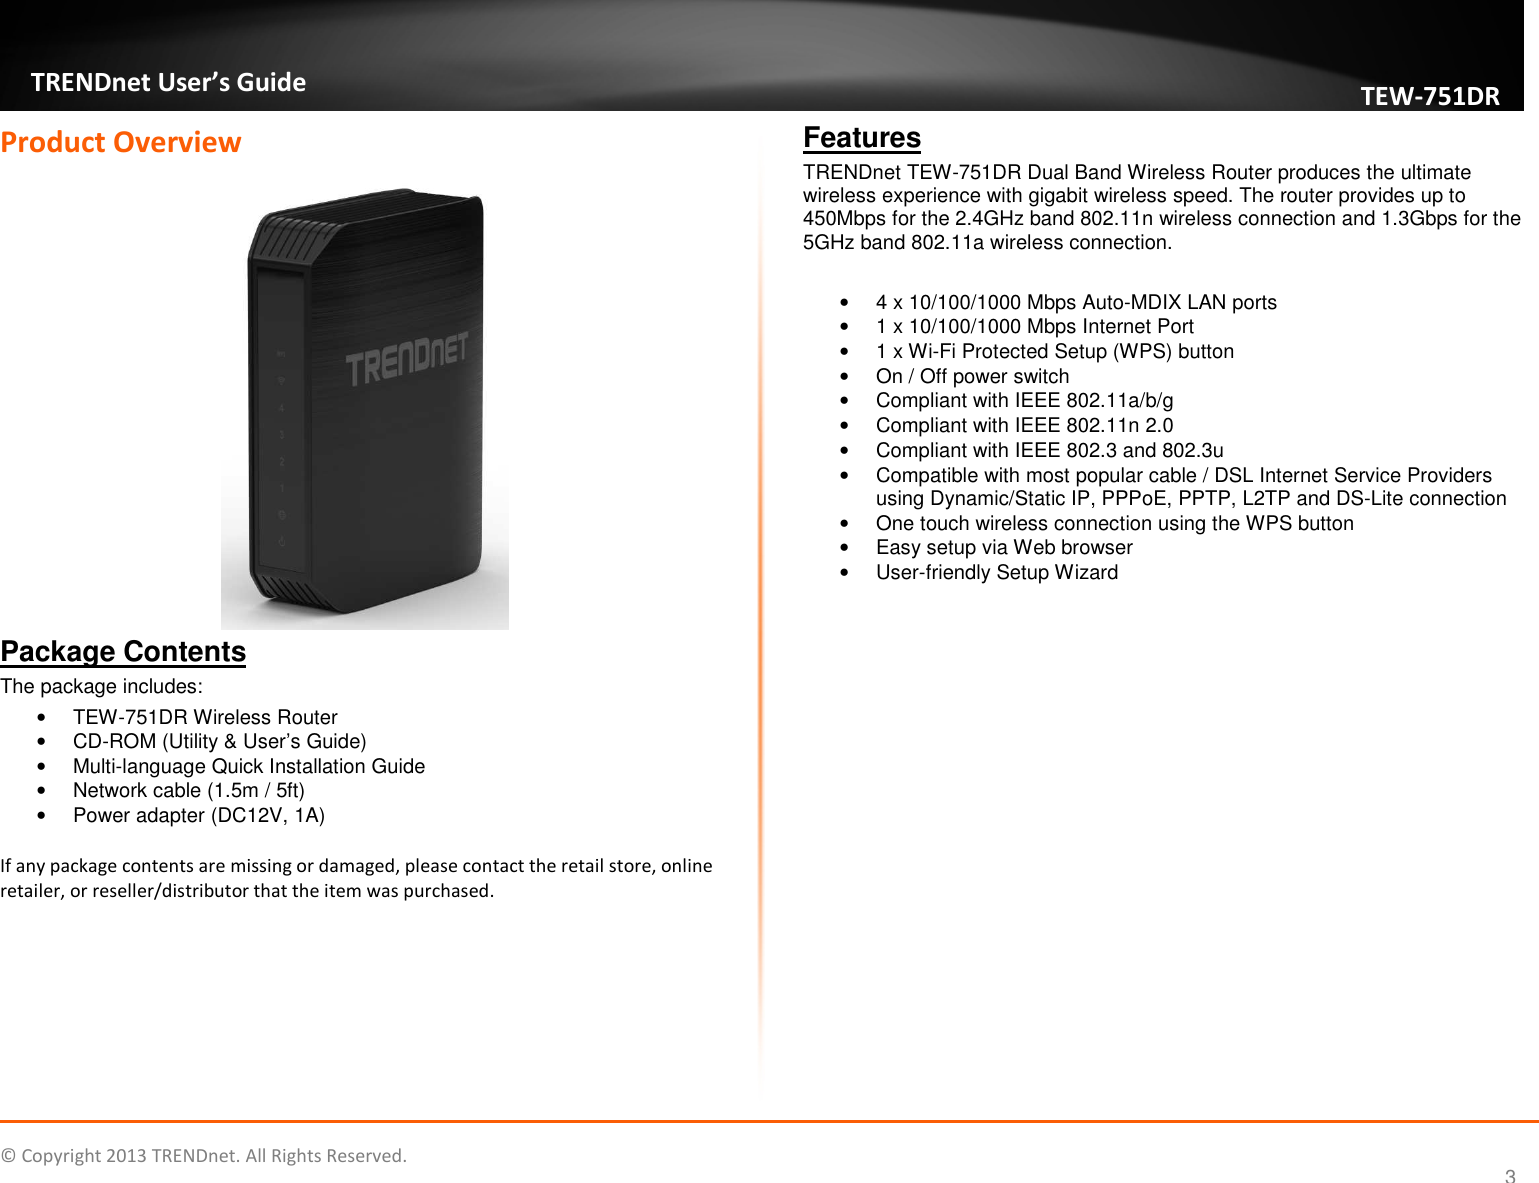   © Copyright 2013 TRENDnet. All Rights Reserved.       TRENDnet User’s Guide TEW751DR 3 Product Overview  Package Contents The package includes: •  TEW-751DR Wireless Router •  CD-ROM (Utility &amp; User’s Guide) •  Multi-language Quick Installation Guide •  Network cable (1.5m / 5ft) •  Power adapter (DC12V, 1A)  If any package contents are missing or damaged, please contact the retail store, online retailer, or reseller/distributor that the item was purchased. Features TRENDnet TEW-751DR Dual Band Wireless Router produces the ultimate wireless experience with gigabit wireless speed. The router provides up to 450Mbps for the 2.4GHz band 802.11n wireless connection and 1.3Gbps for the 5GHz band 802.11a wireless connection.  •  4 x 10/100/1000 Mbps Auto-MDIX LAN ports •  1 x 10/100/1000 Mbps Internet Port •  1 x Wi-Fi Protected Setup (WPS) button •  On / Off power switch •  Compliant with IEEE 802.11a/b/g •  Compliant with IEEE 802.11n 2.0 •  Compliant with IEEE 802.3 and 802.3u •  Compatible with most popular cable / DSL Internet Service Providers using Dynamic/Static IP, PPPoE, PPTP, L2TP and DS-Lite connection •  One touch wireless connection using the WPS button •  Easy setup via Web browser •  User-friendly Setup Wizard    